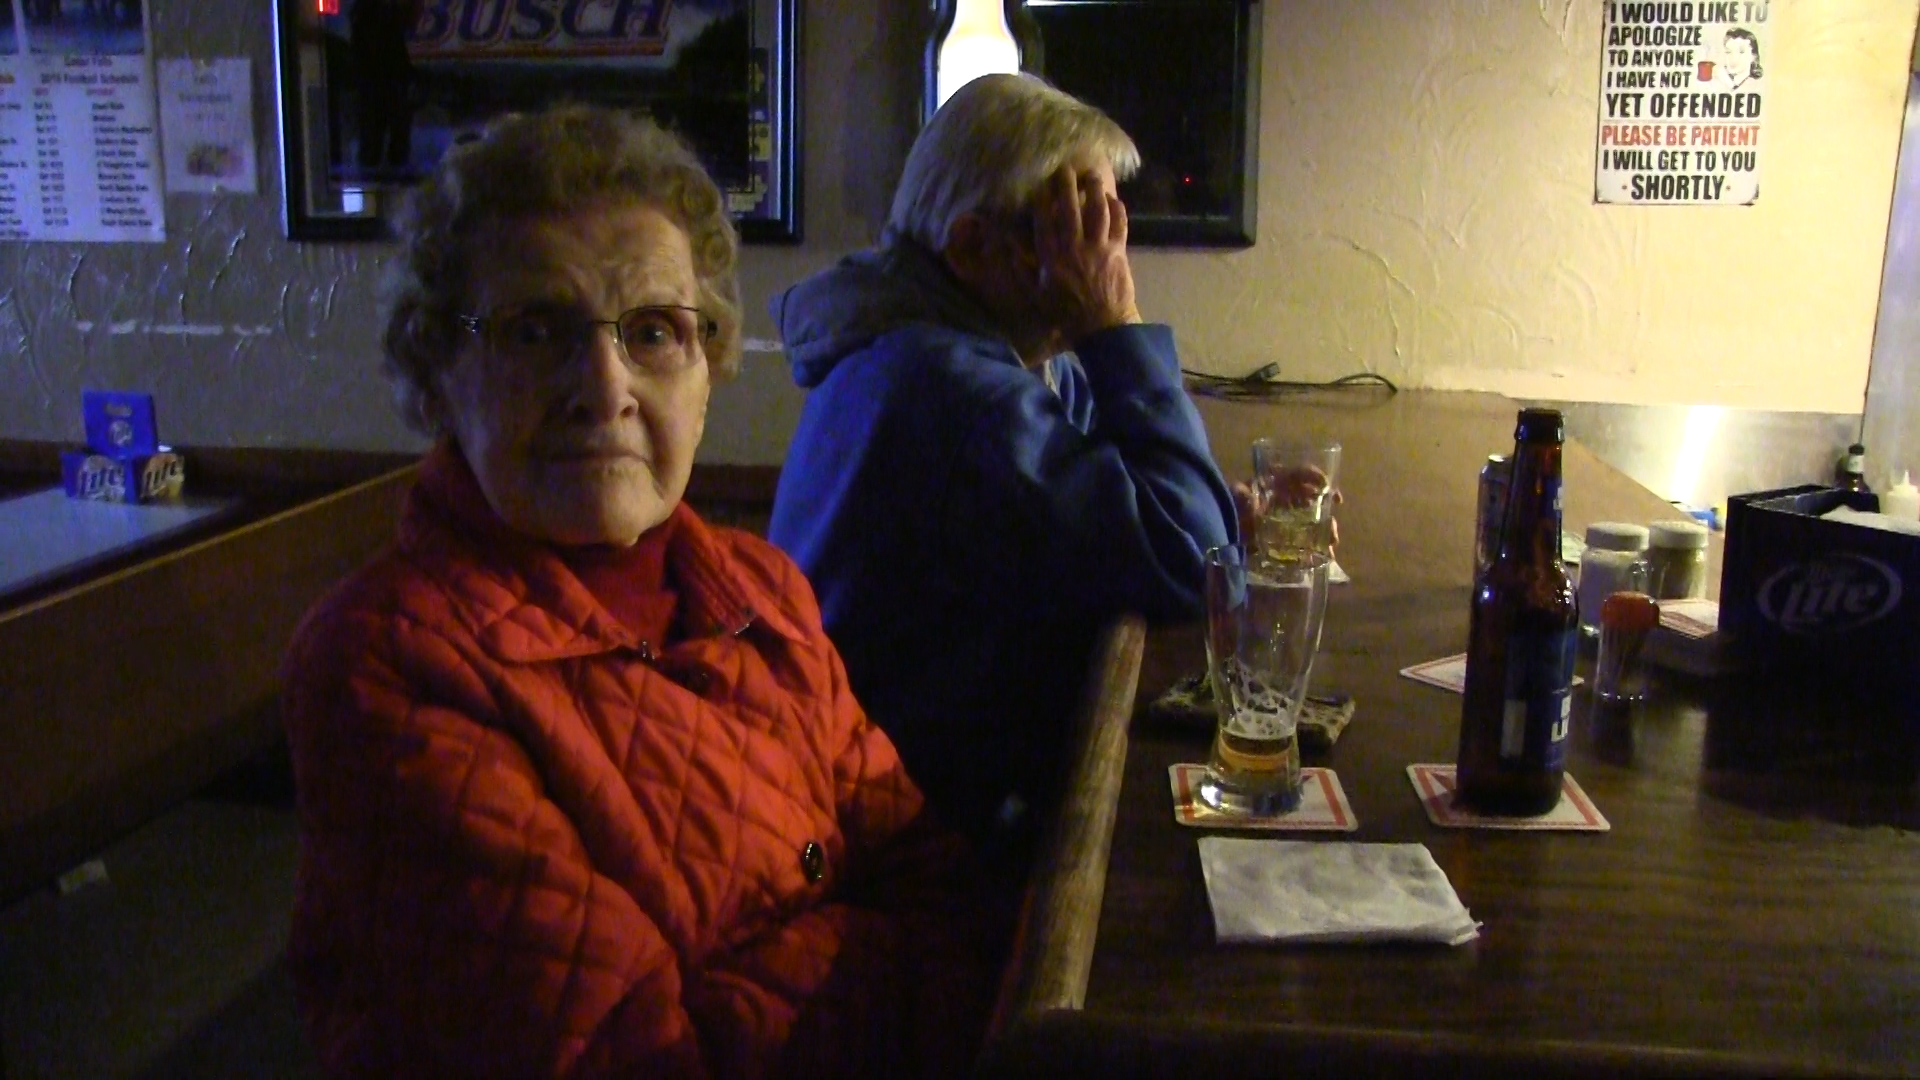 This 93-year-old woman was drinking a Bud at the end of the Lime Springs bar. Photo by Media Milwaukee staff.